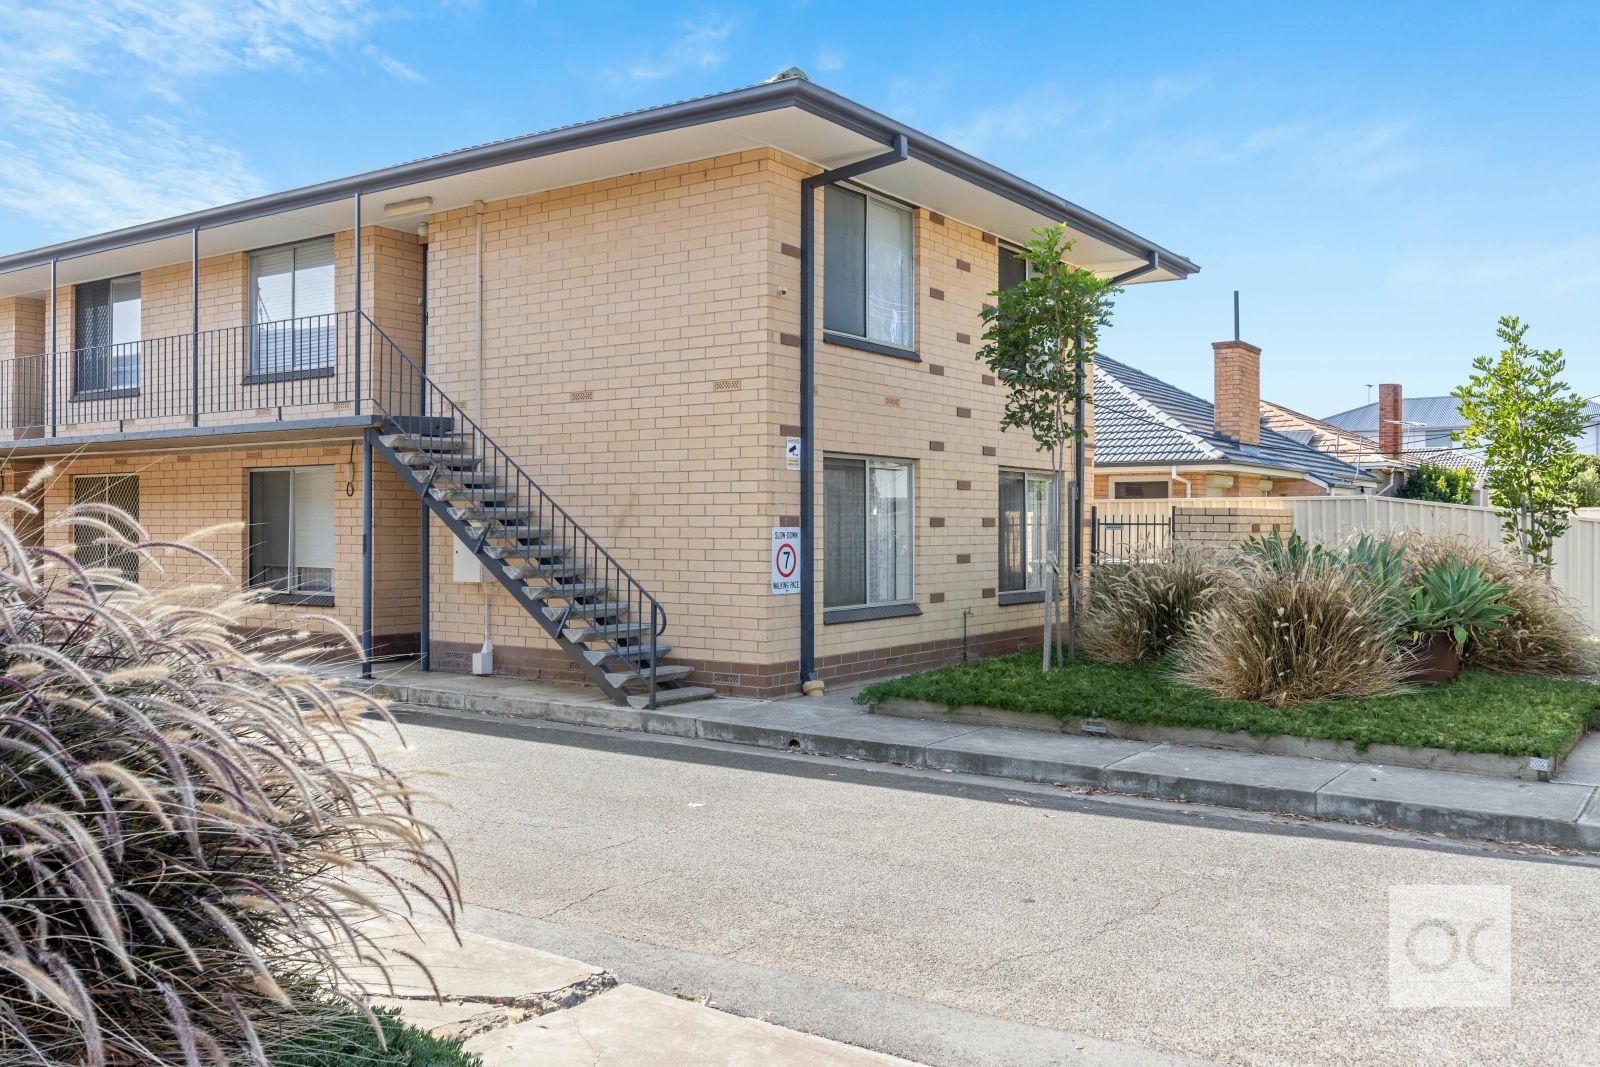 2 bedrooms Apartment / Unit / Flat in 11/49 Angus Avenue EDWARDSTOWN SA, 5039